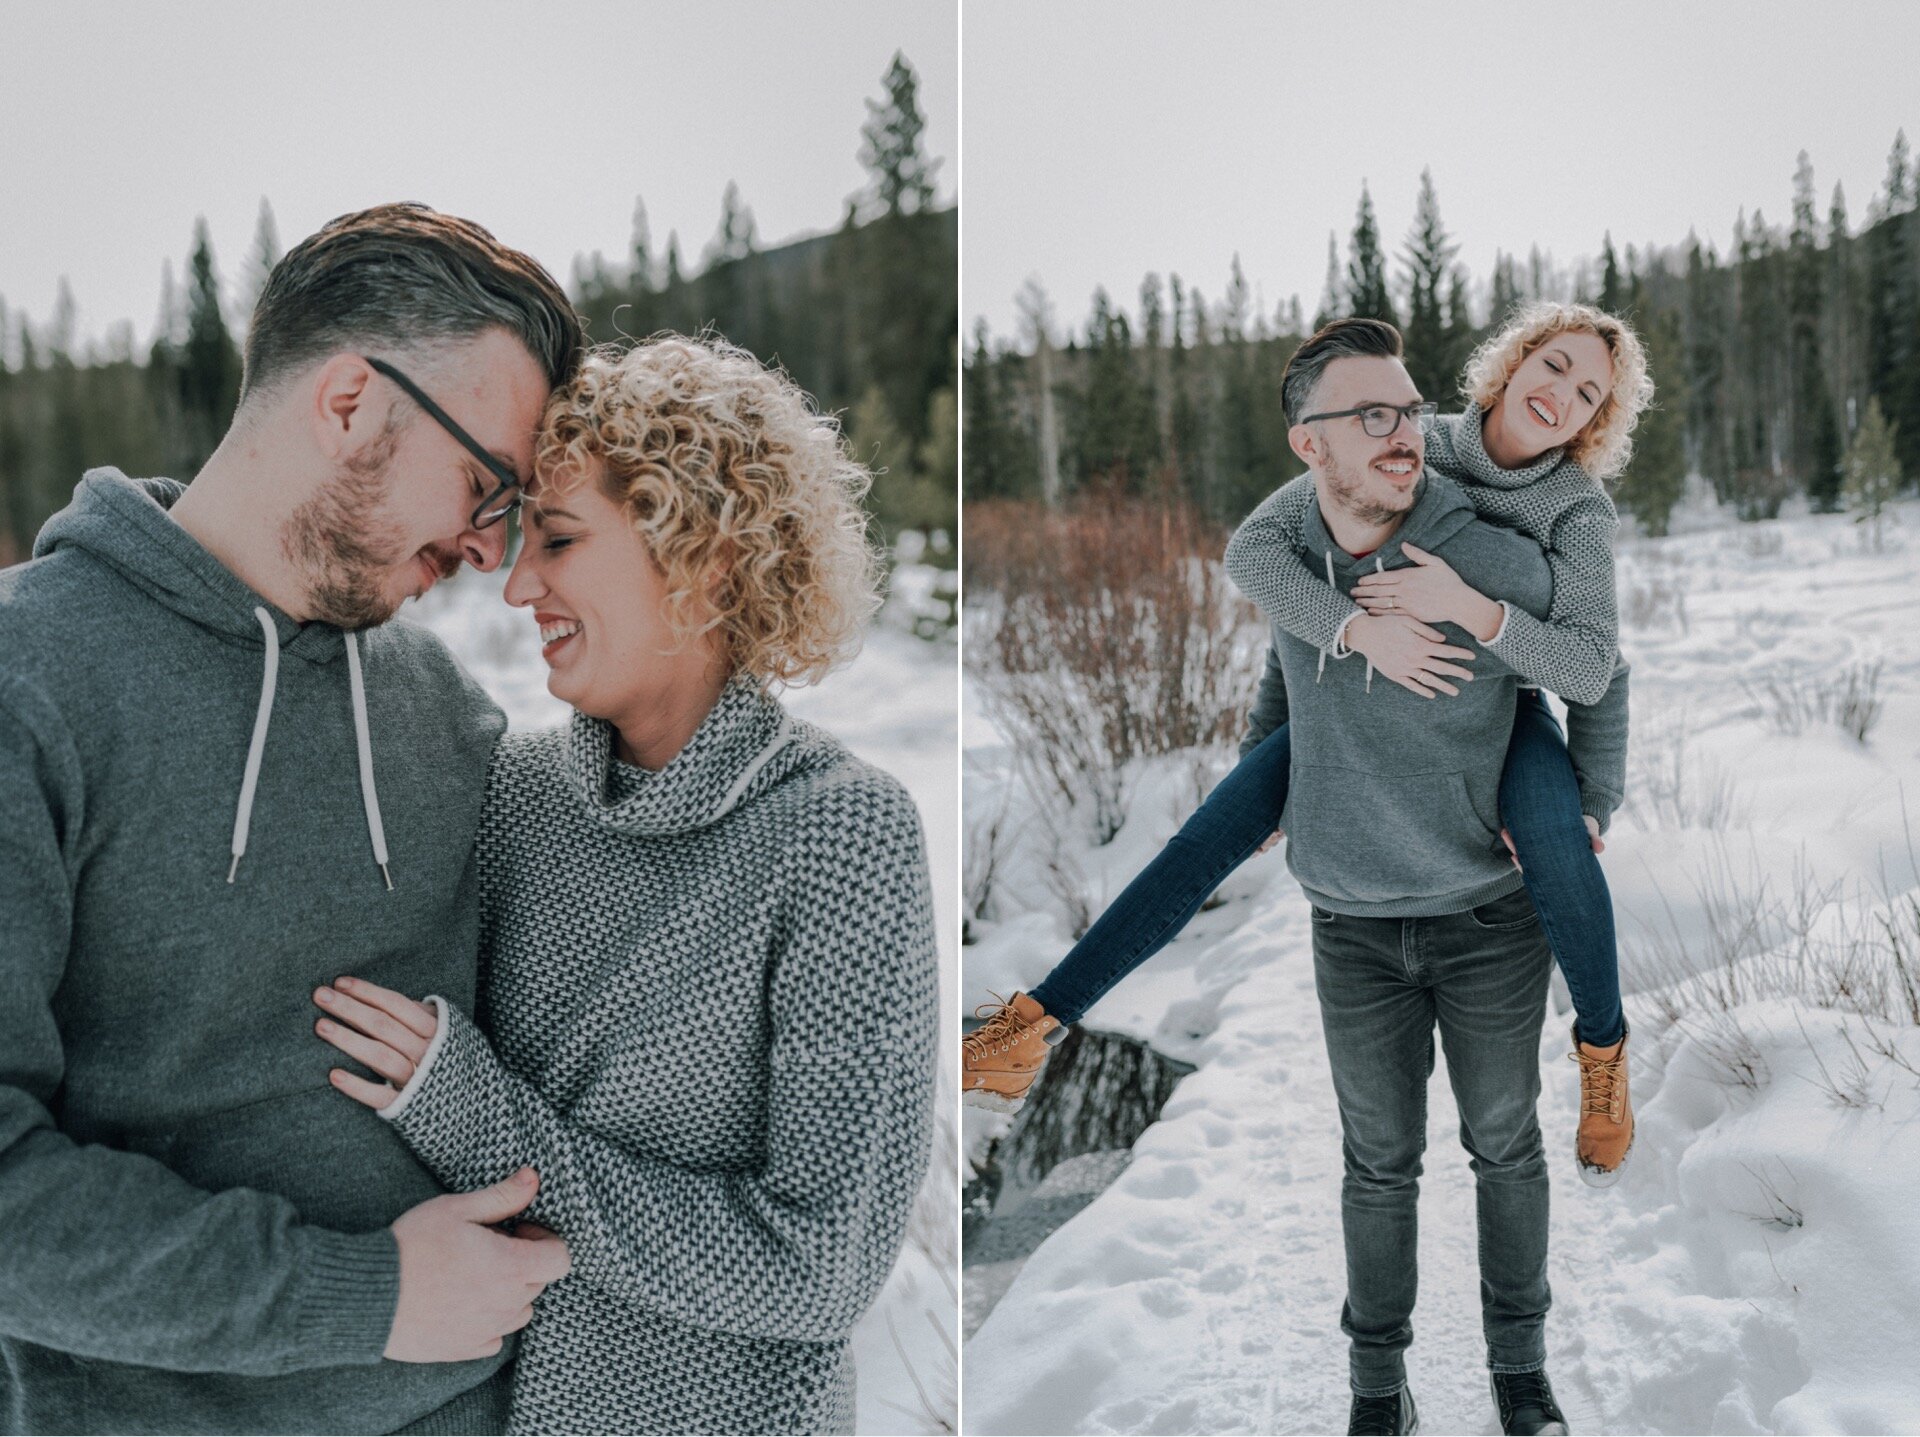 07_Kelsey&Taylor030_Kelsey&Taylor026_frisco_Photographer_engagement_Co_Hannah_Session_Photography_Minnesota_Snowy_Colorado_adventure_ampe_Mountain_engaged.jpg